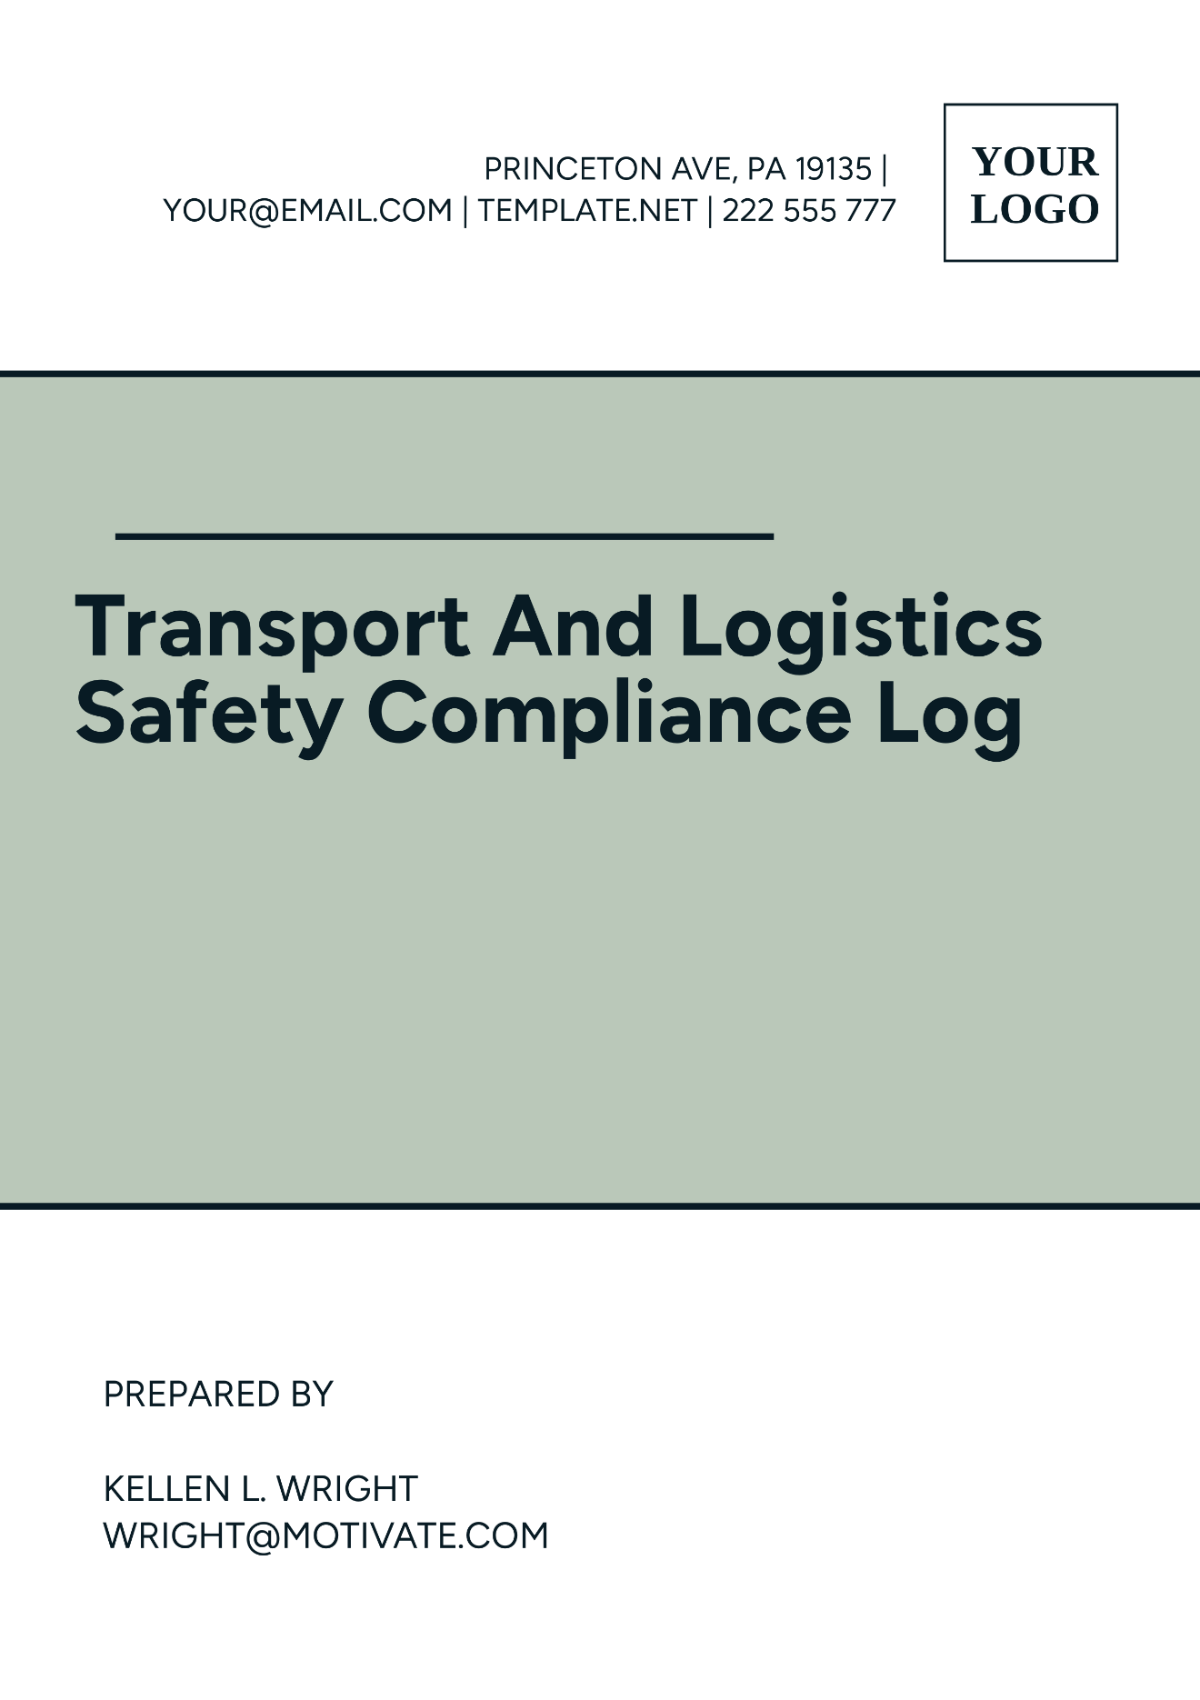 Free Transport And Logistics Safety Compliance Log Template